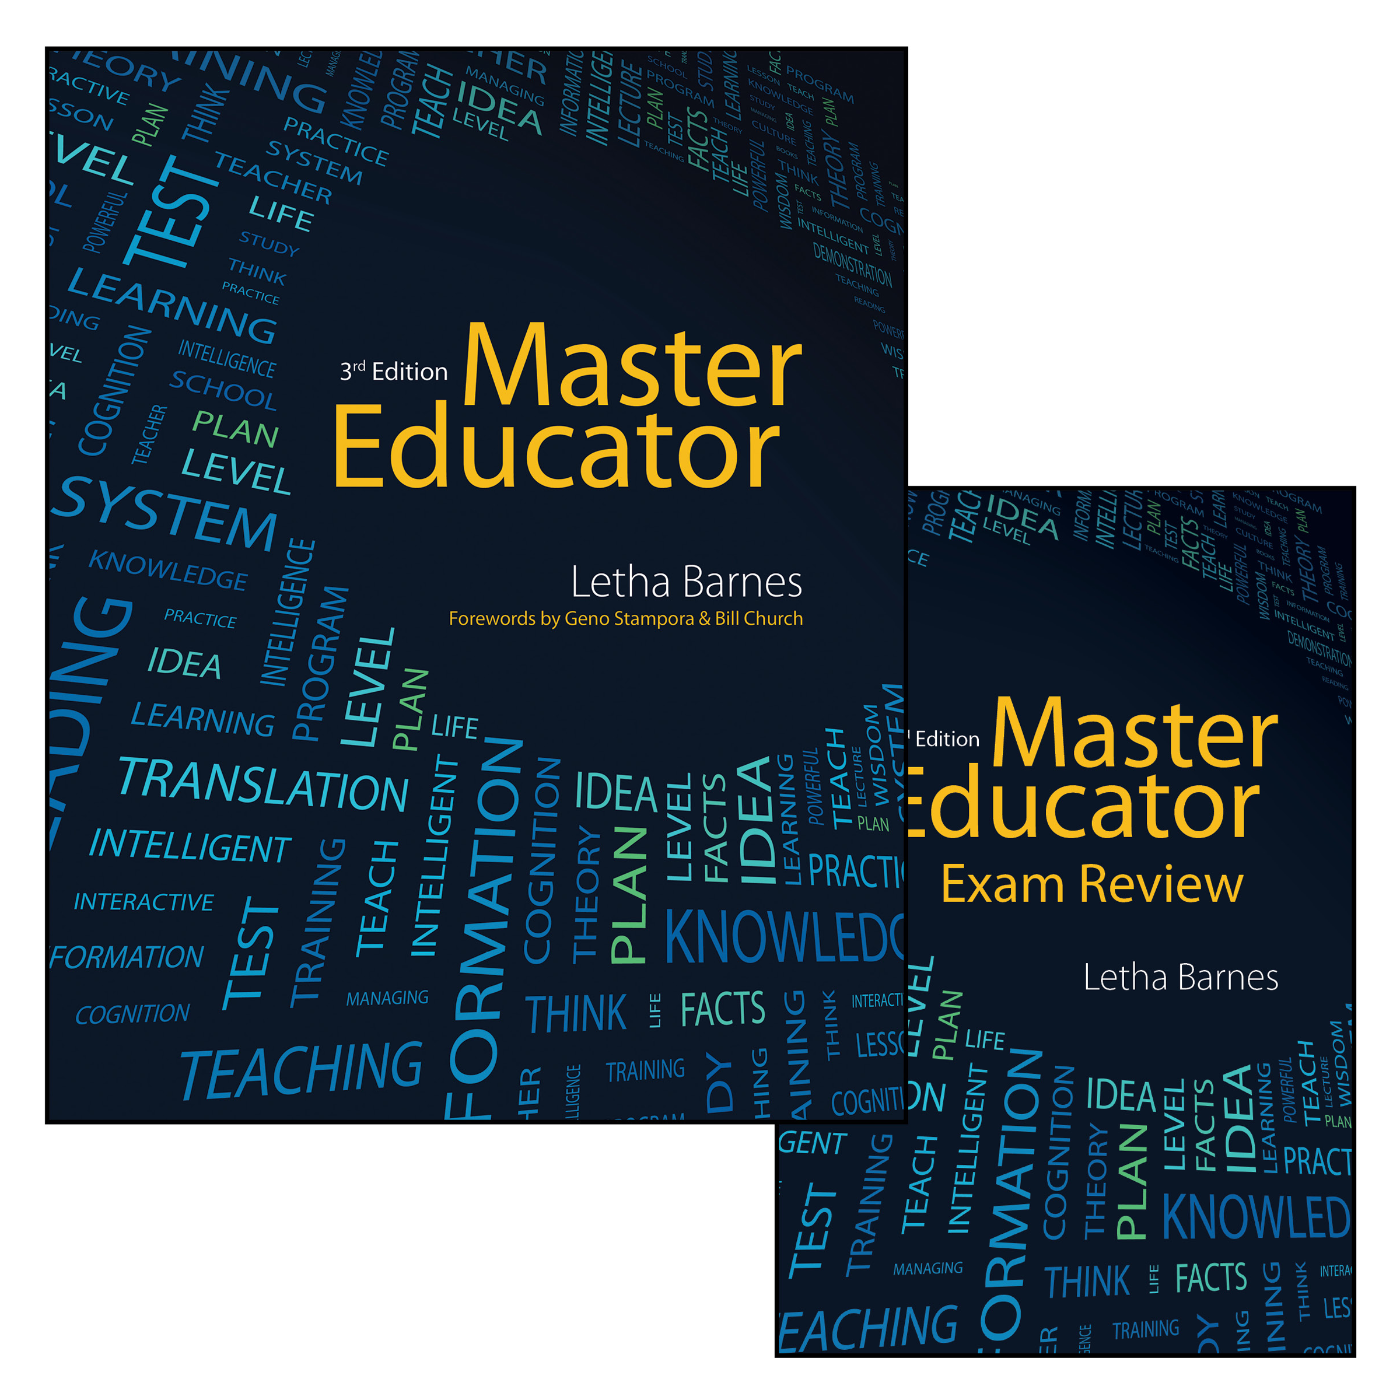 Master Educator Student Course Book with Exam Review